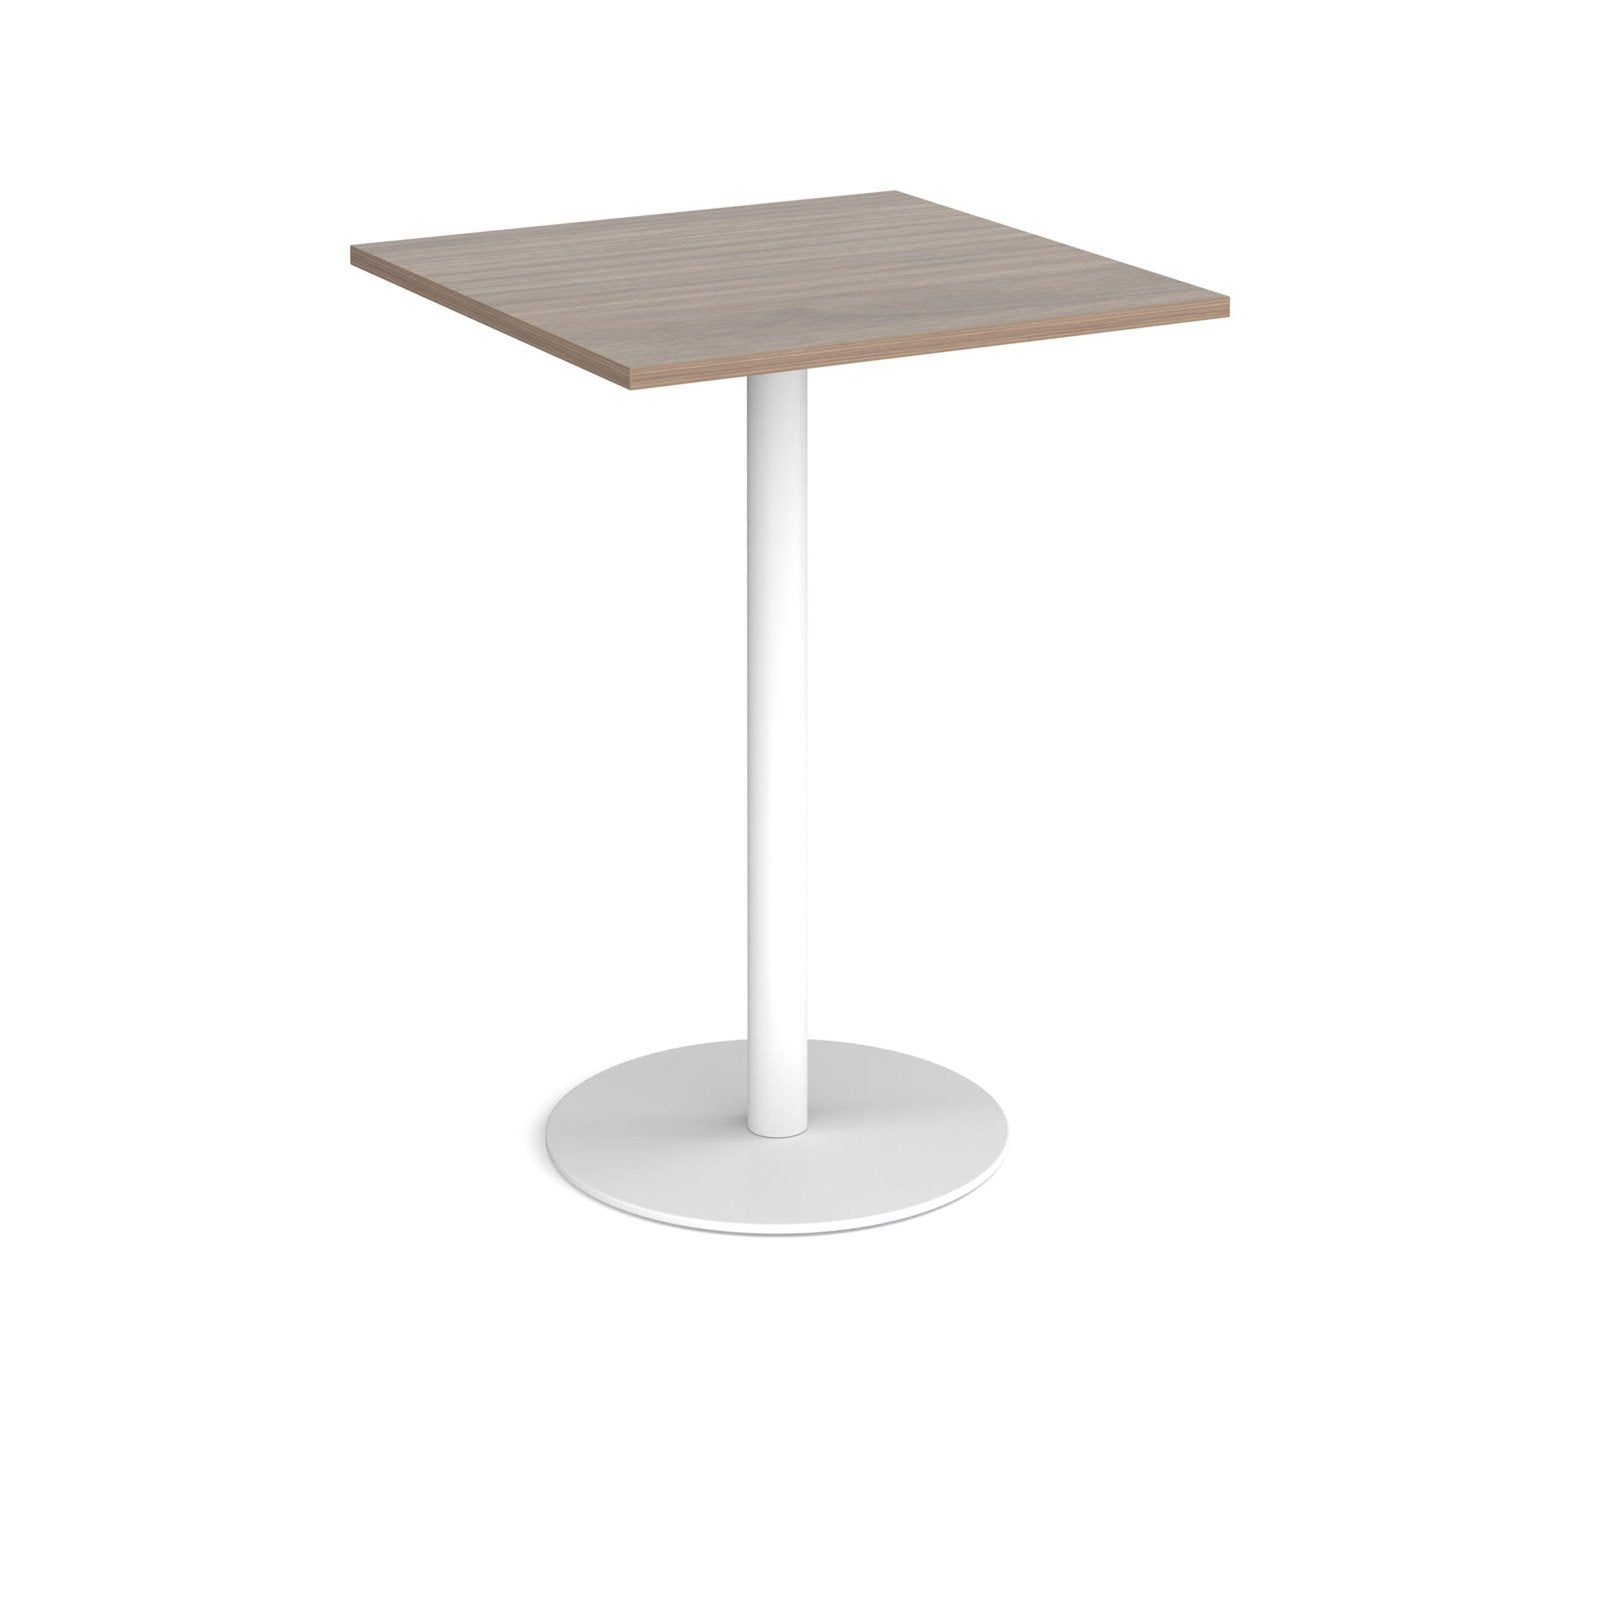 Monza square poseur table with flat round base - Office Products Online